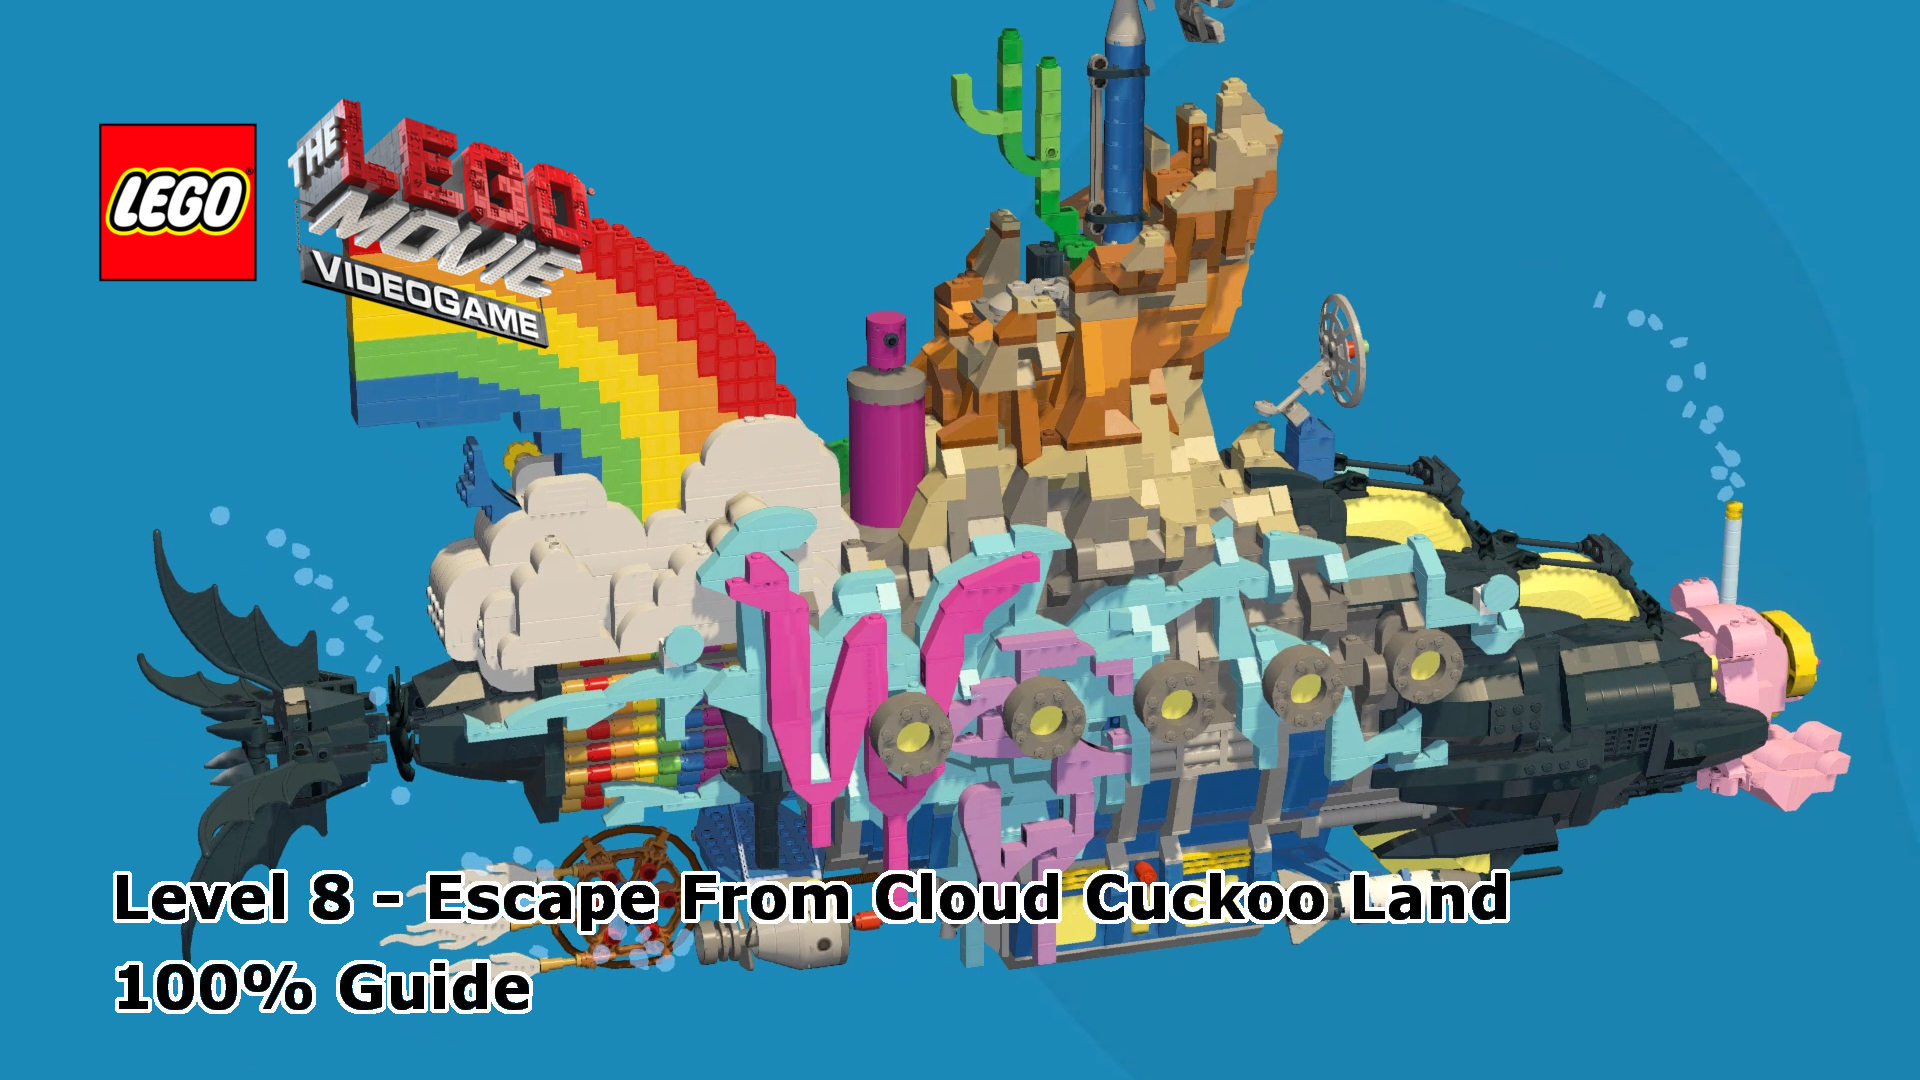 build ål Tage en risiko The LEGO Movie Videogame – Escape From Cloud Cuckoo Land 100% Guide